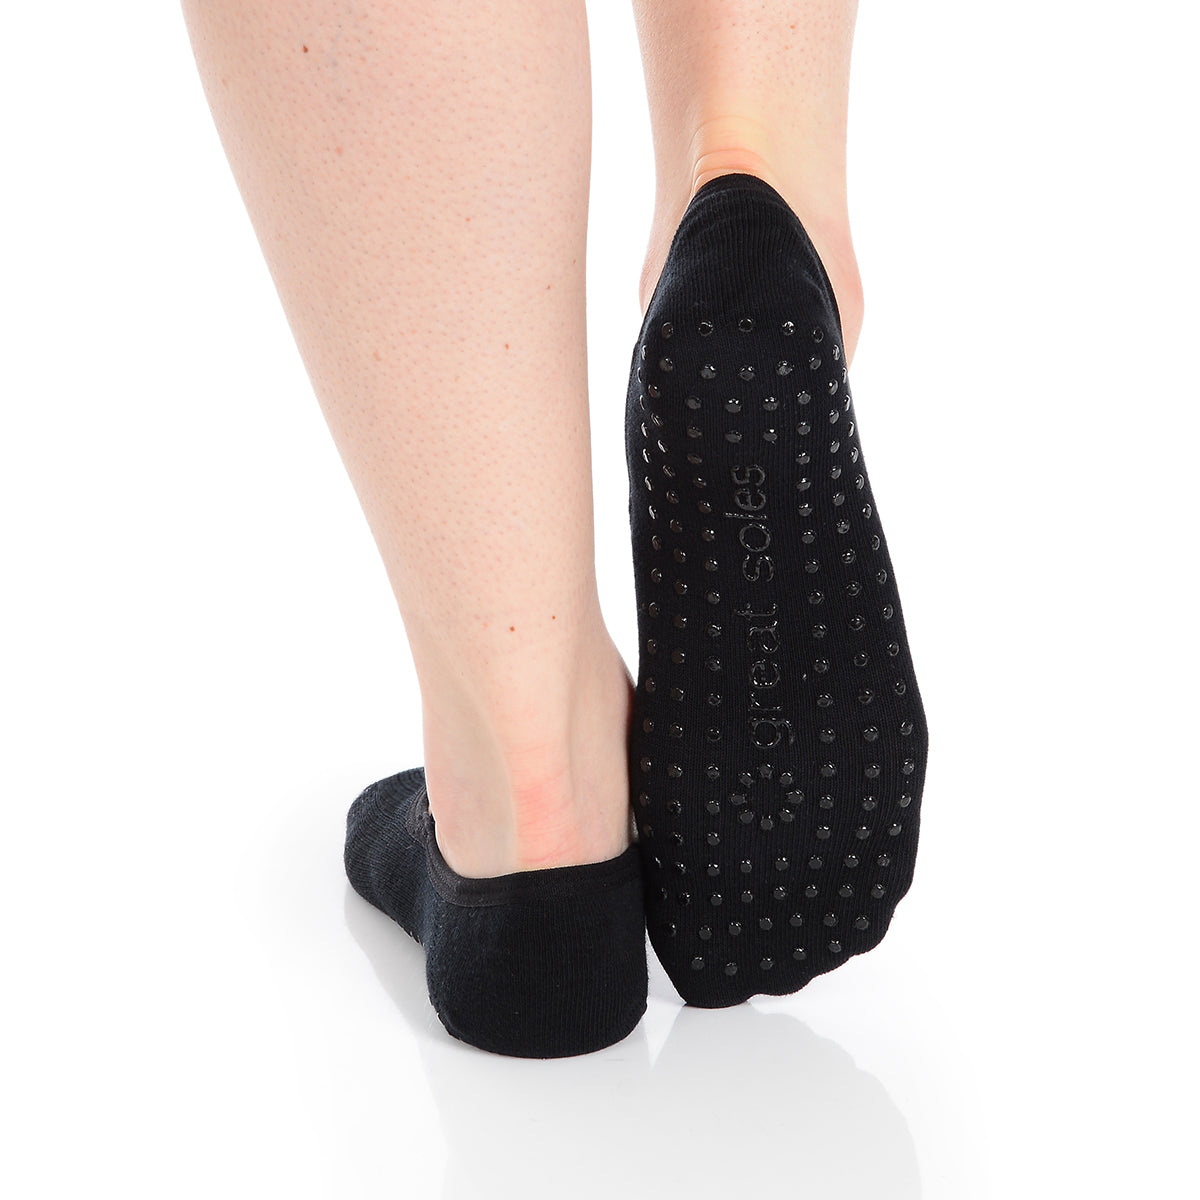 Breathable Black Mesh Grip Sock for Pilates Barre Yoga Dance Workout -  Great Soles